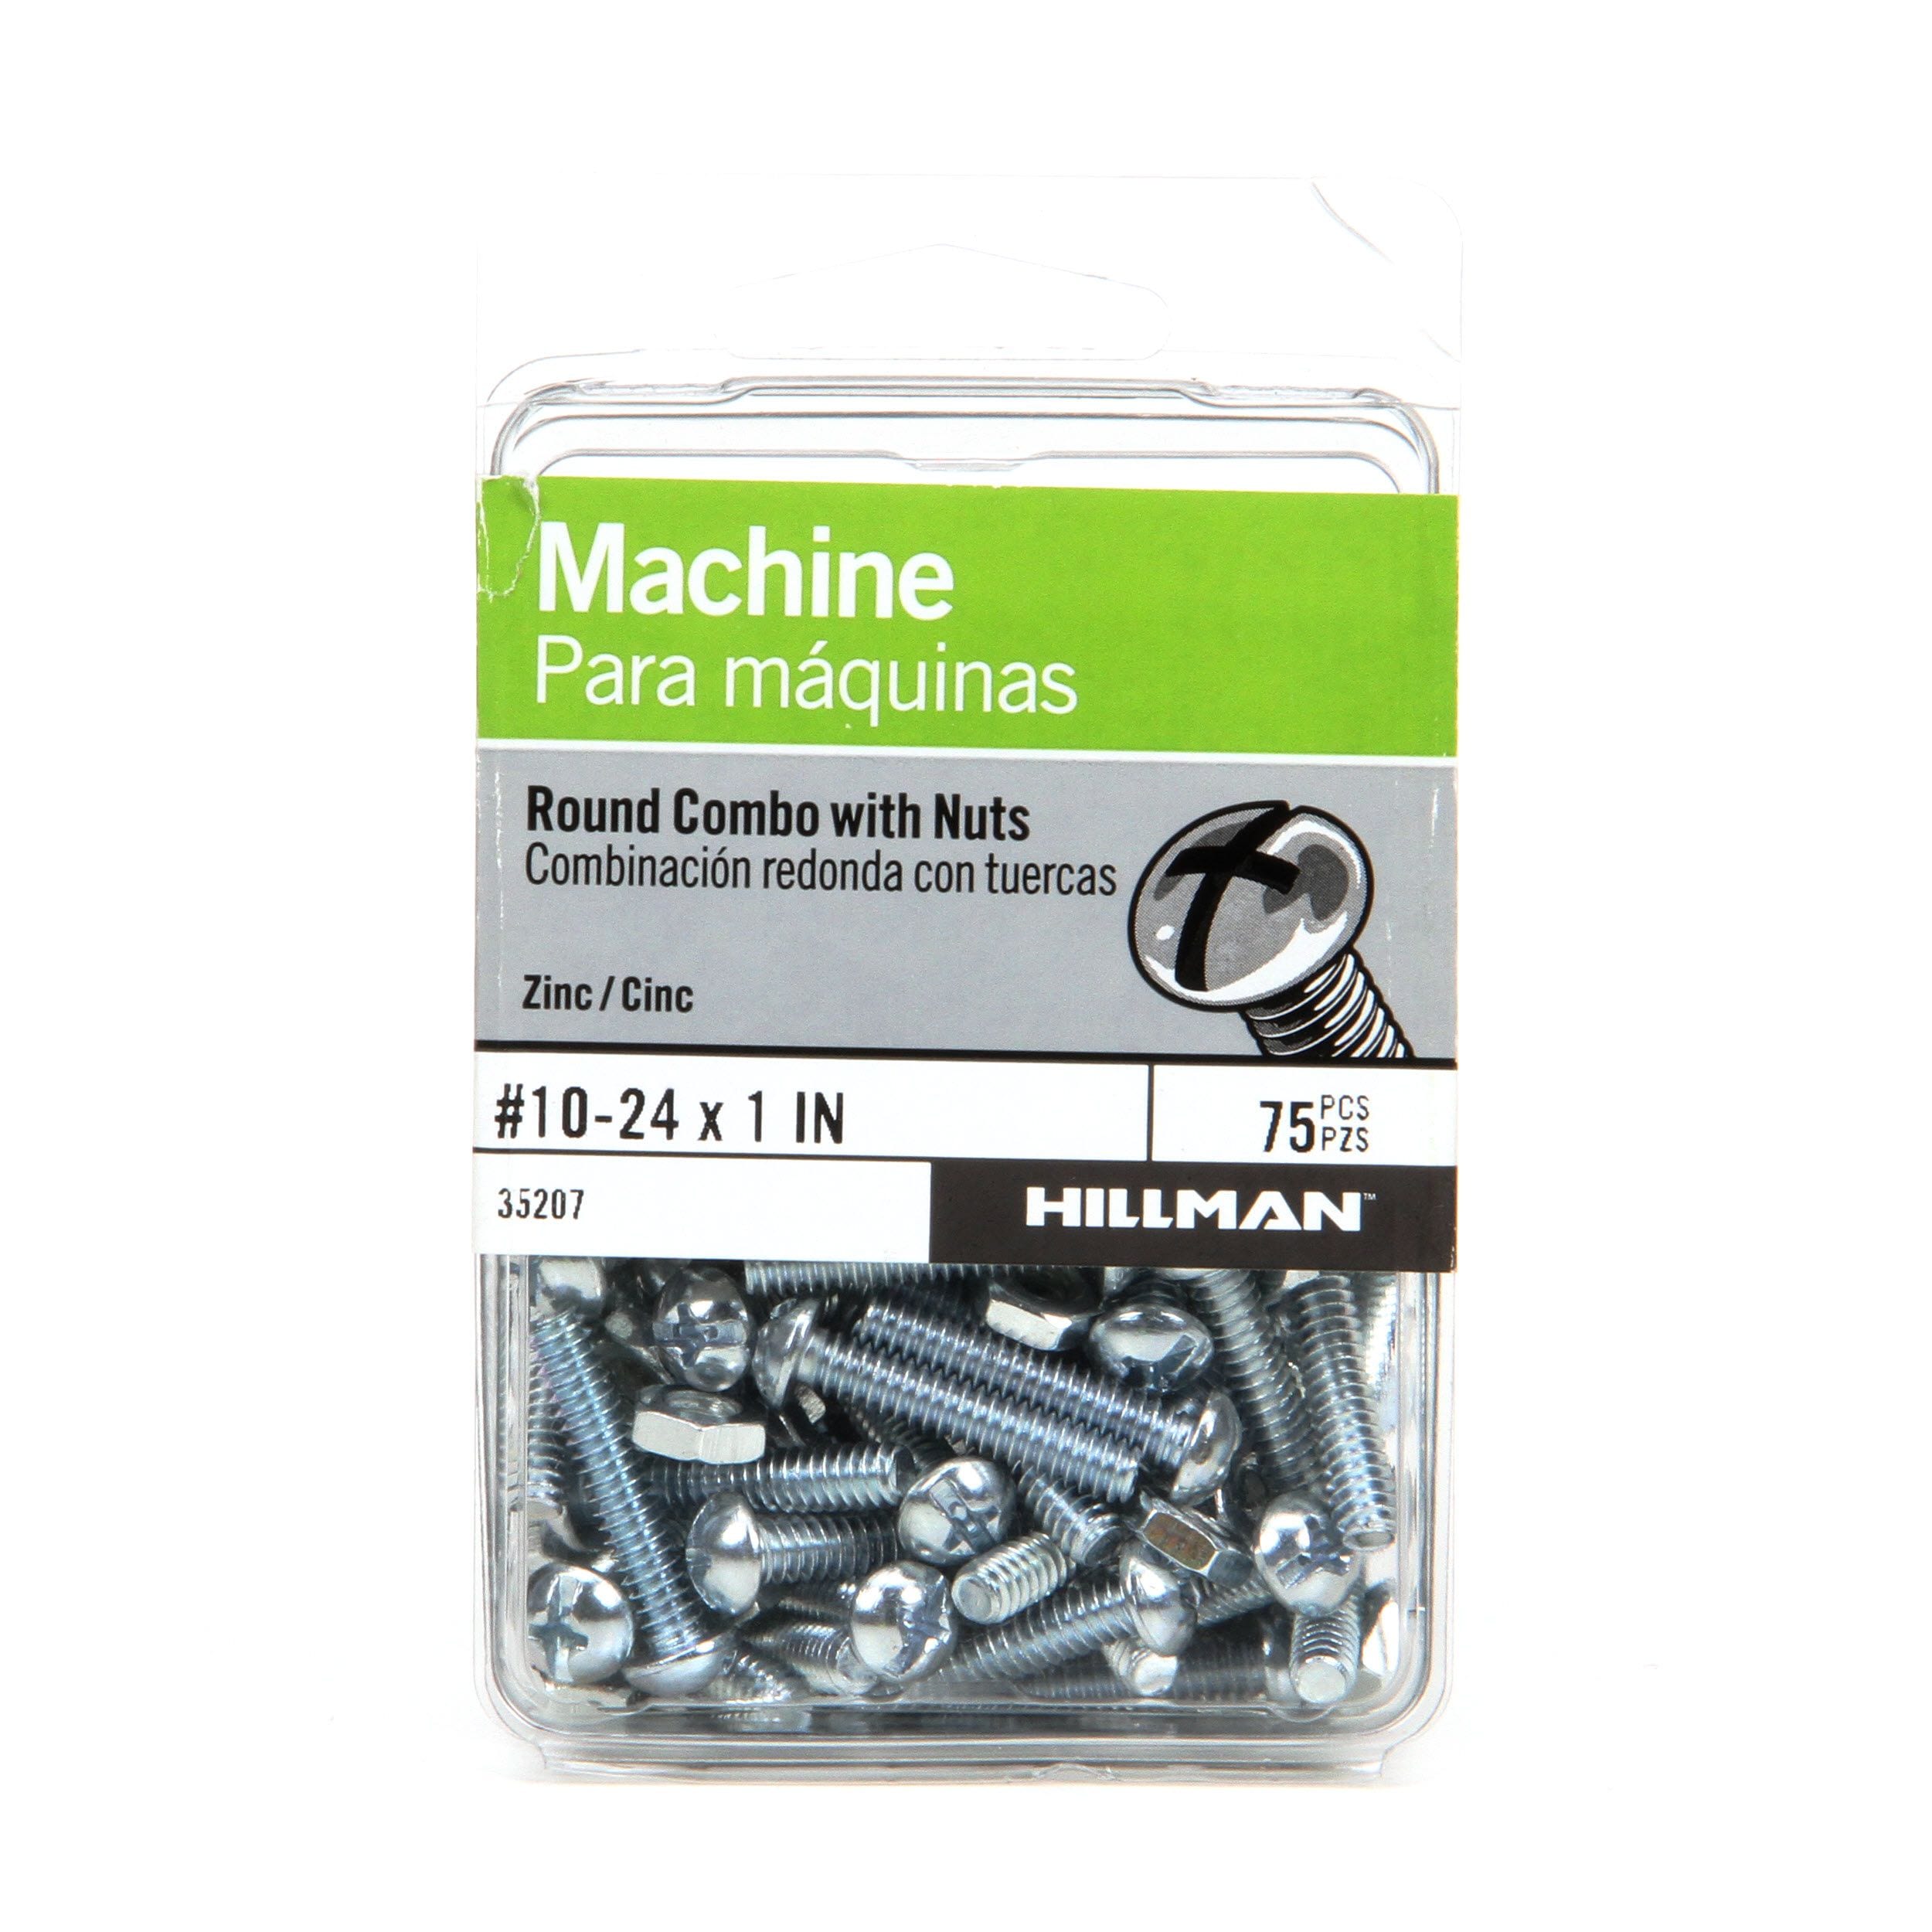 Pack of 10 Hillman 7737 Machine Screw Combination with Nut 1/4 x 3 in. 